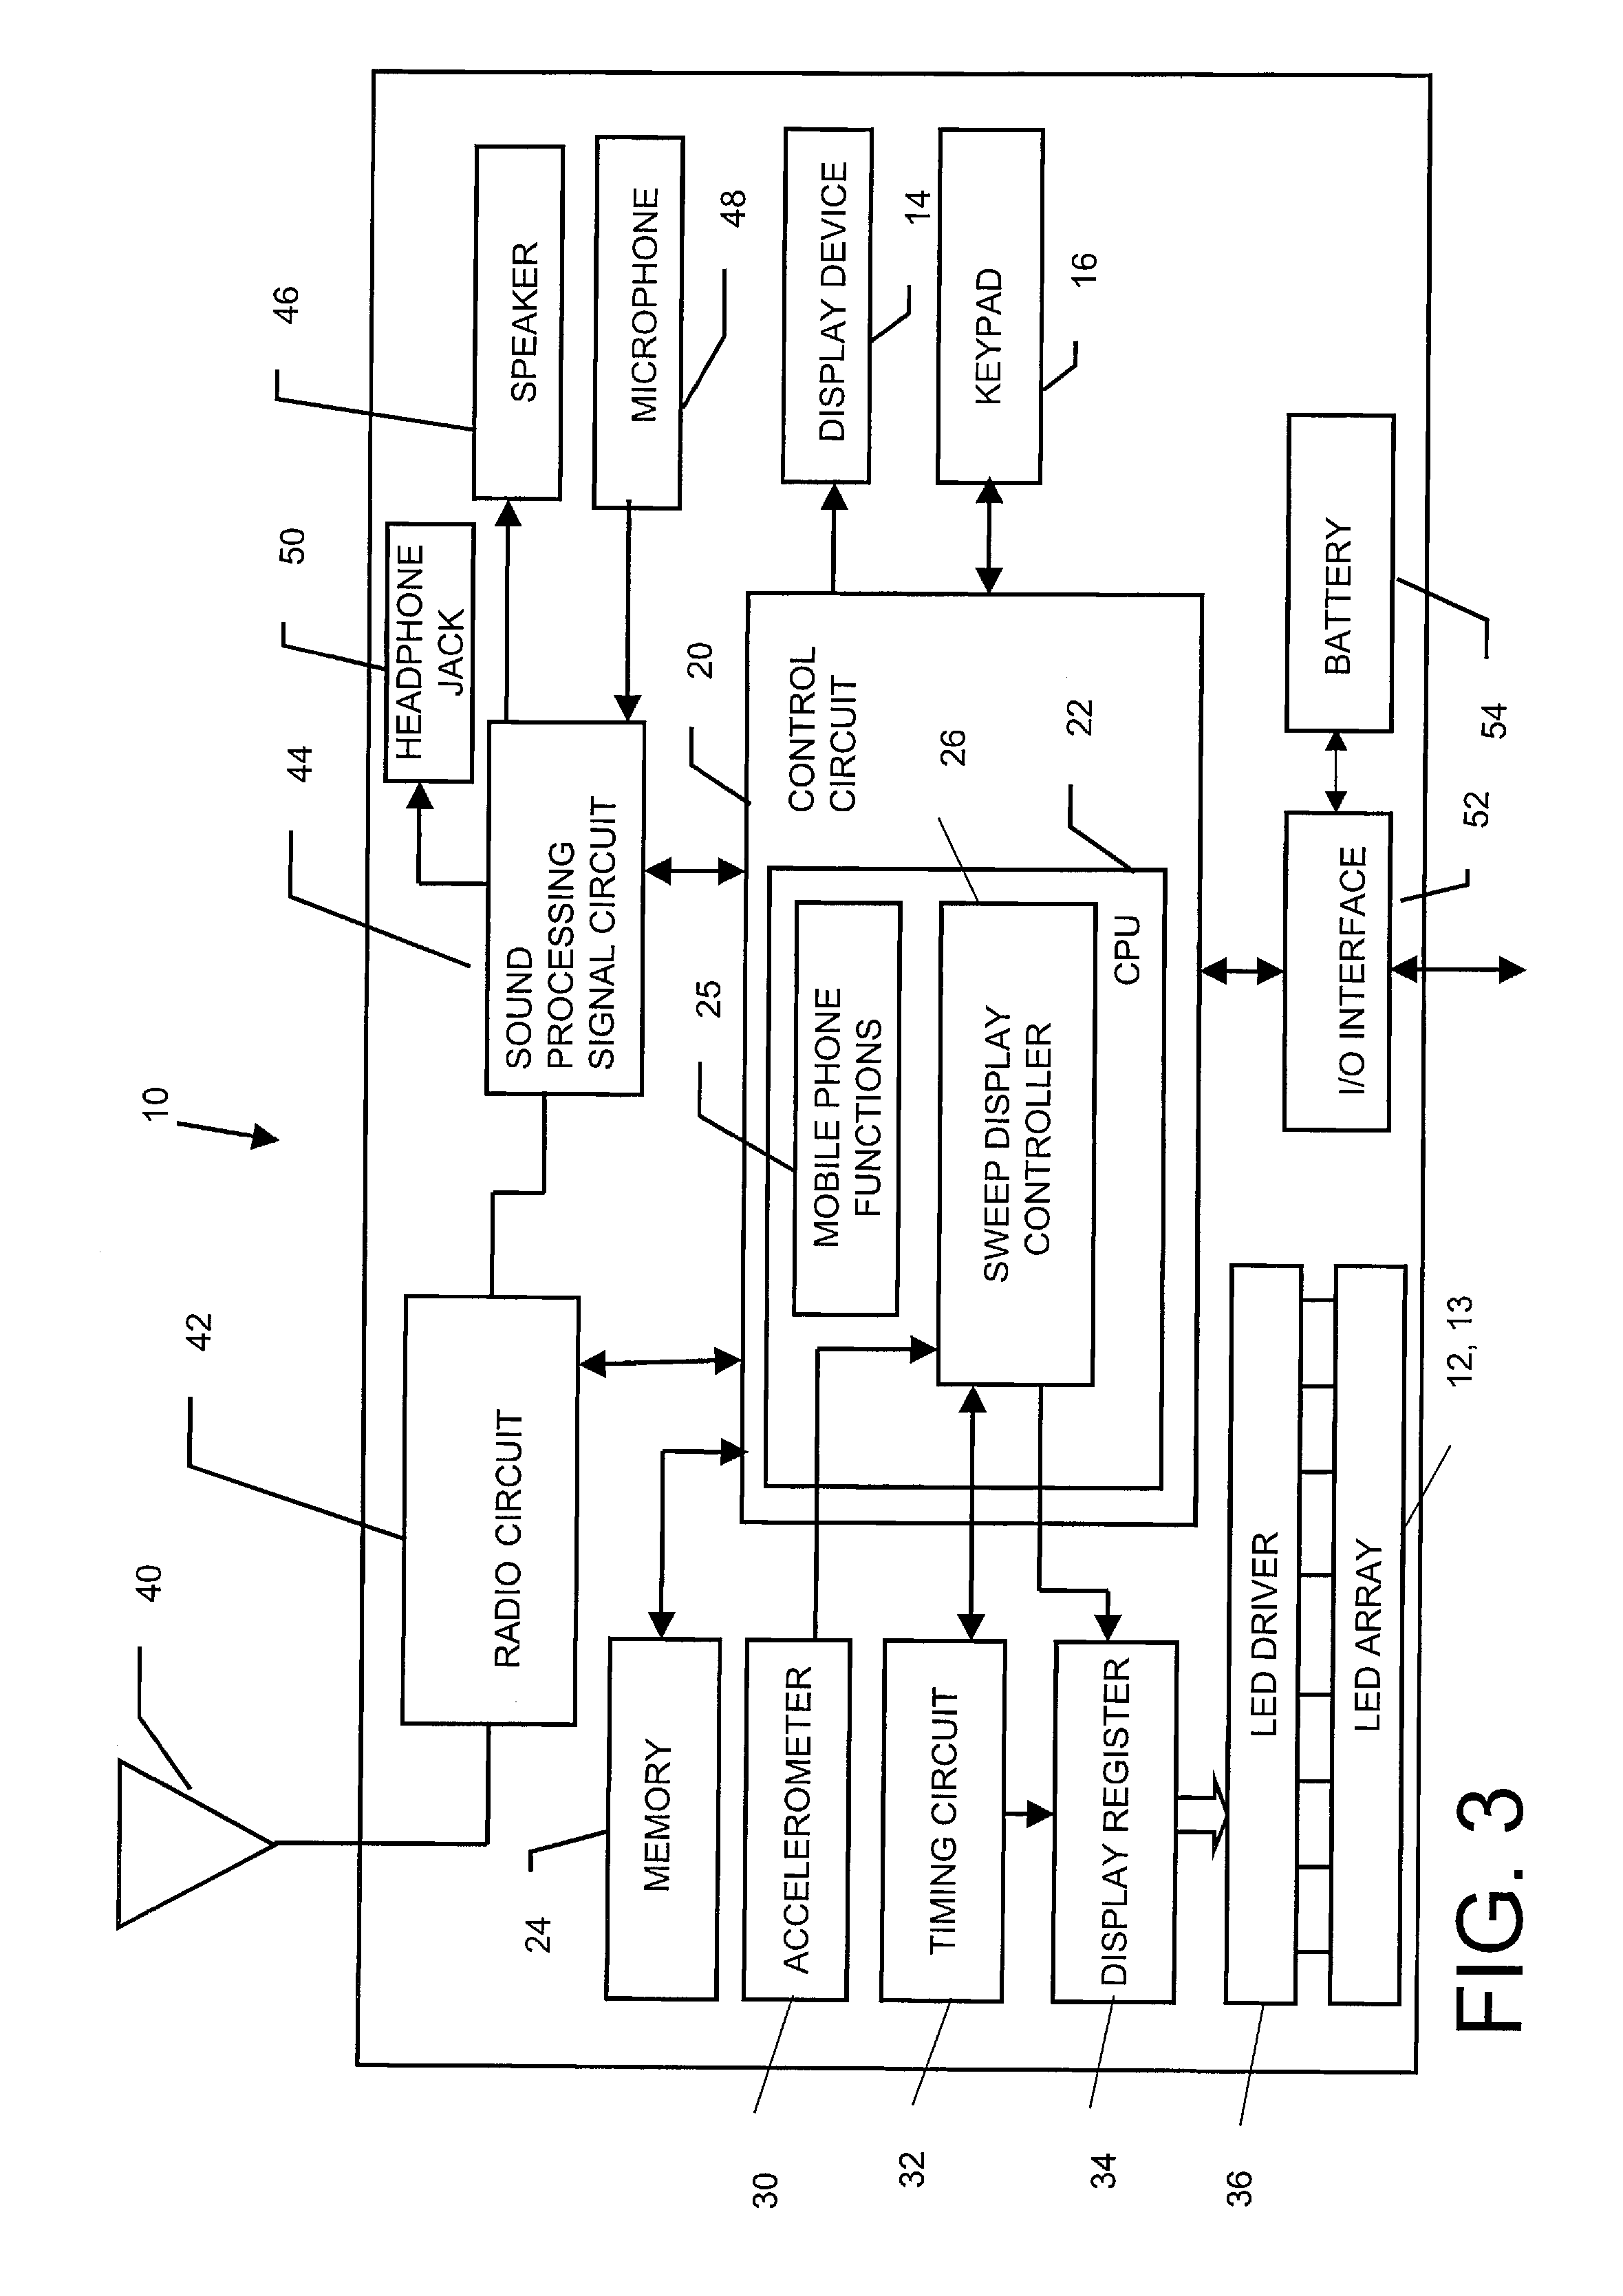 Optical display for portable electronic device